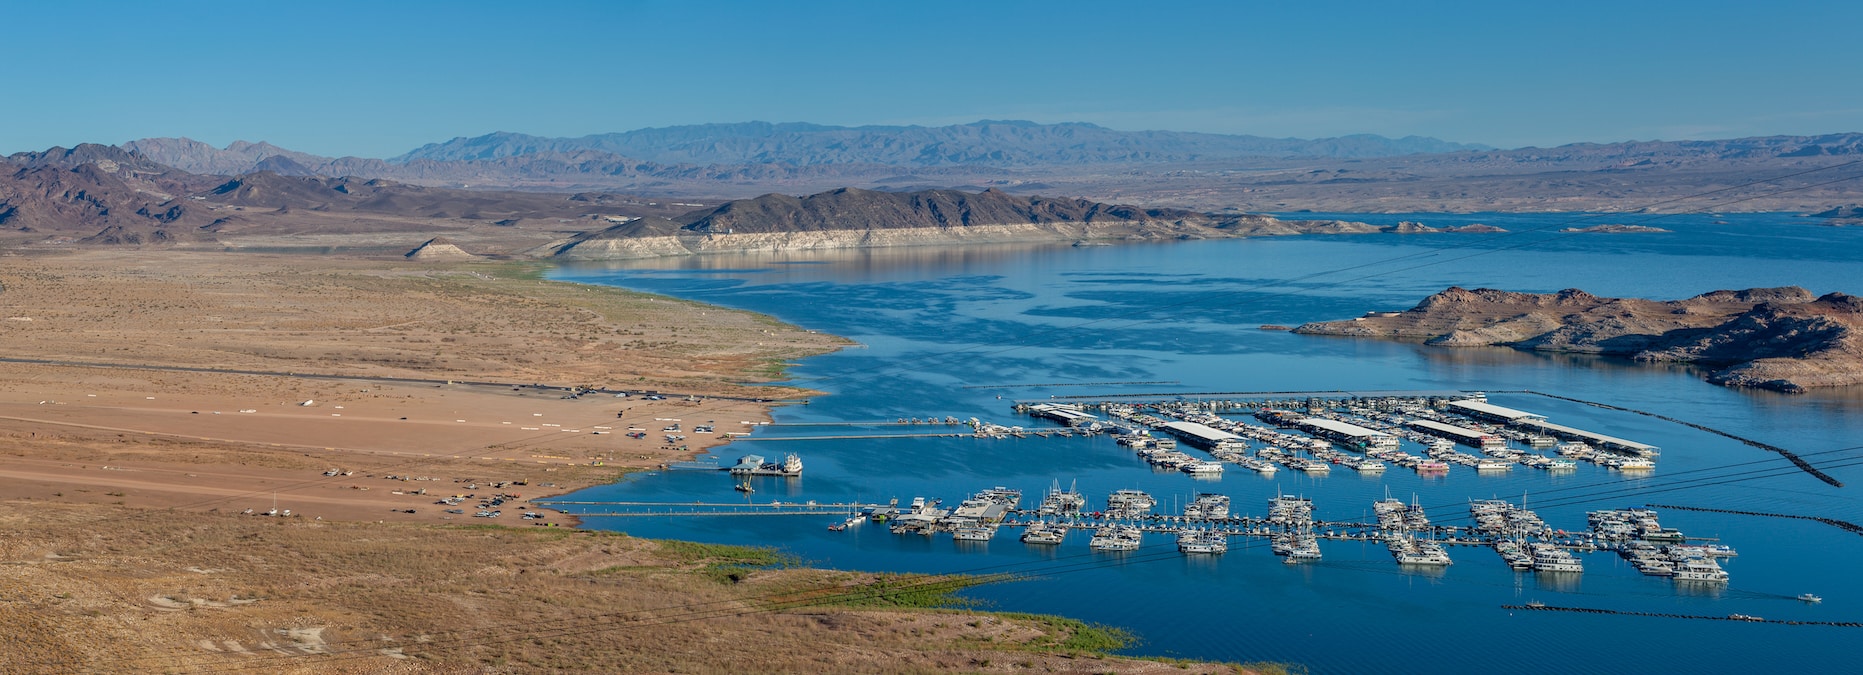 The Hemenway Harbor Marina at Lake Mead, the largest man-made water reservoir in the U.S., at approximately 47% capacity